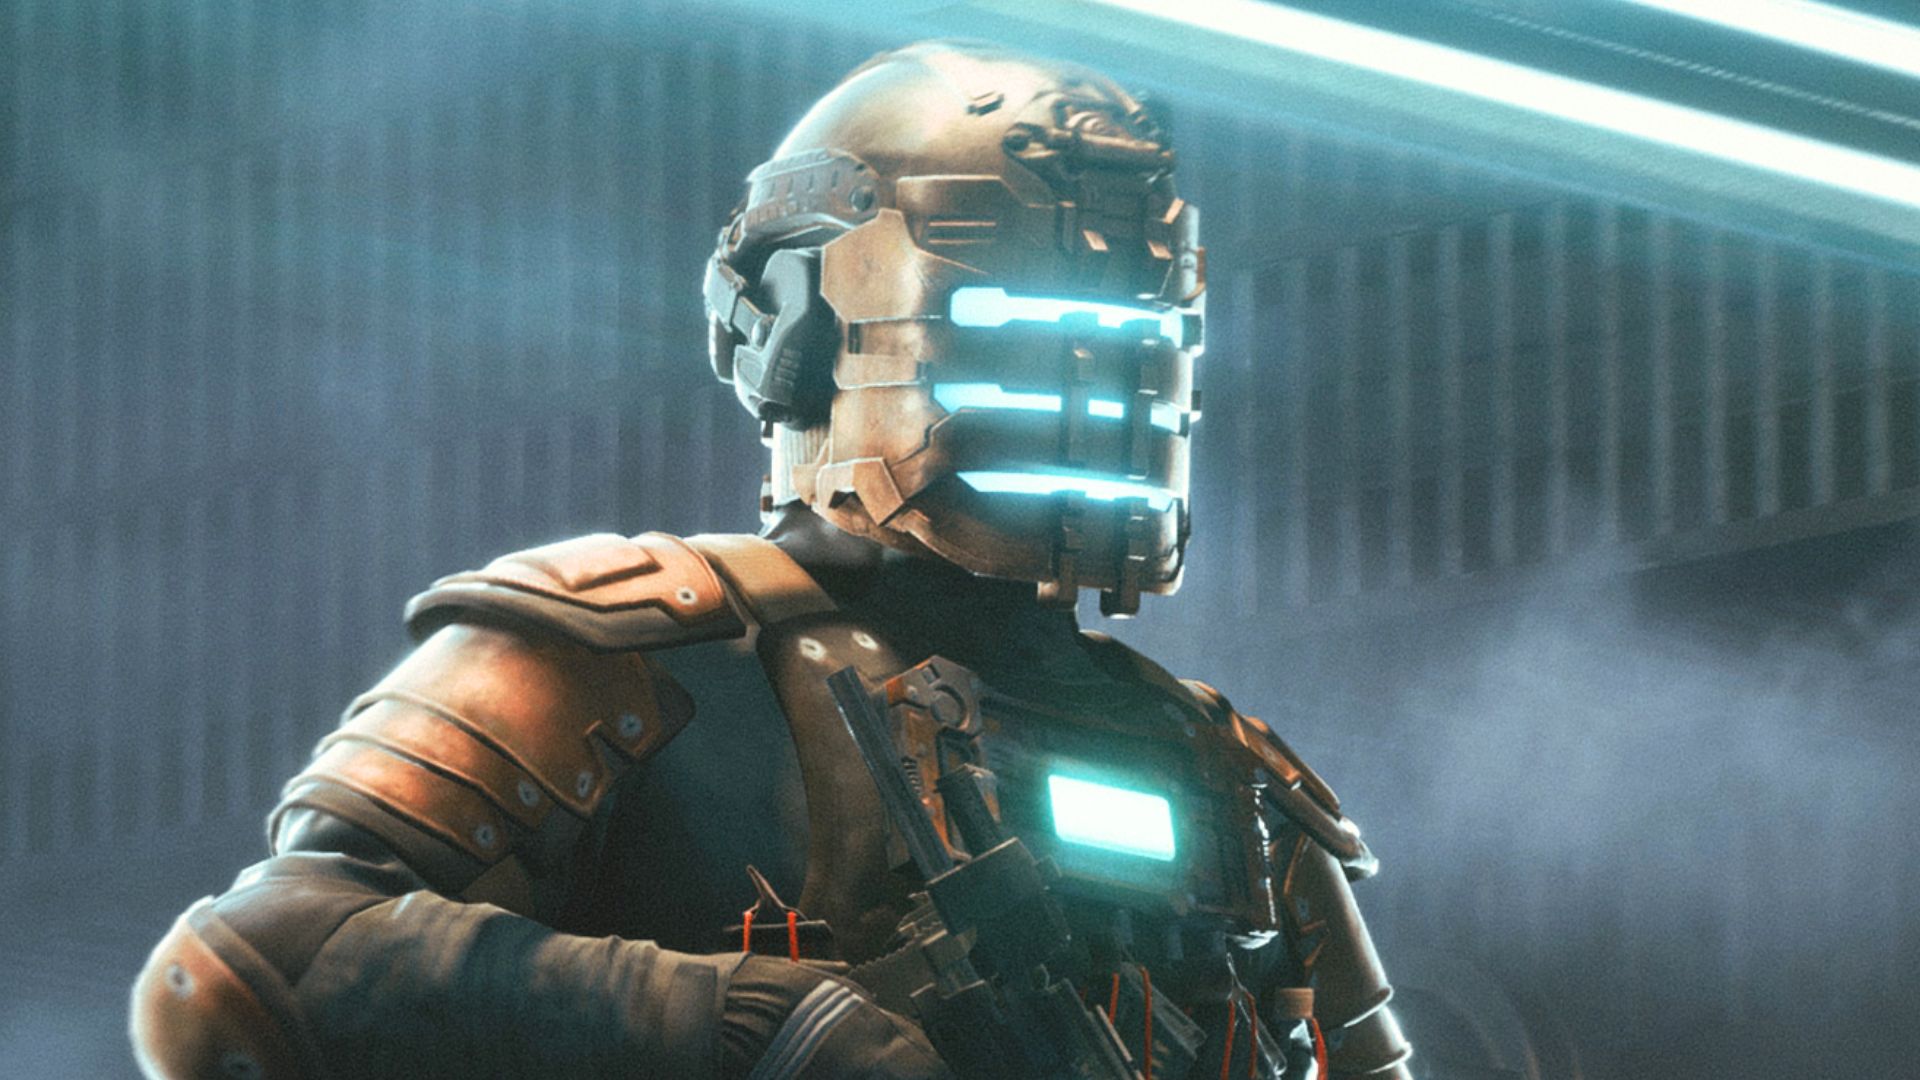 Dead Space is partially coming back to life in a really strange way